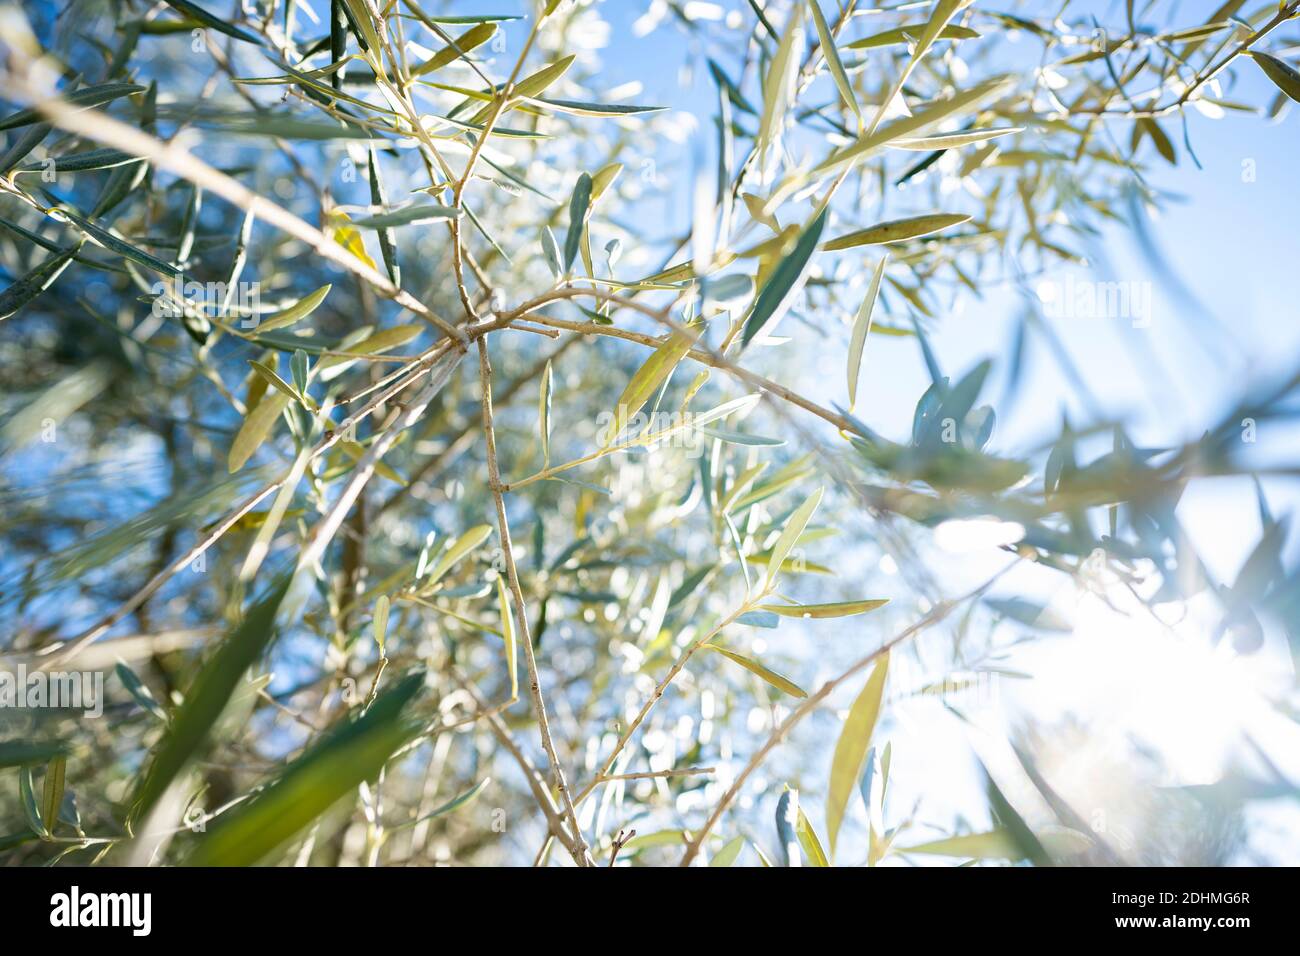 (Selective focus) Stunning view of some olive branches in the foreground and a blue sky in the background. Italy. Stock Photo